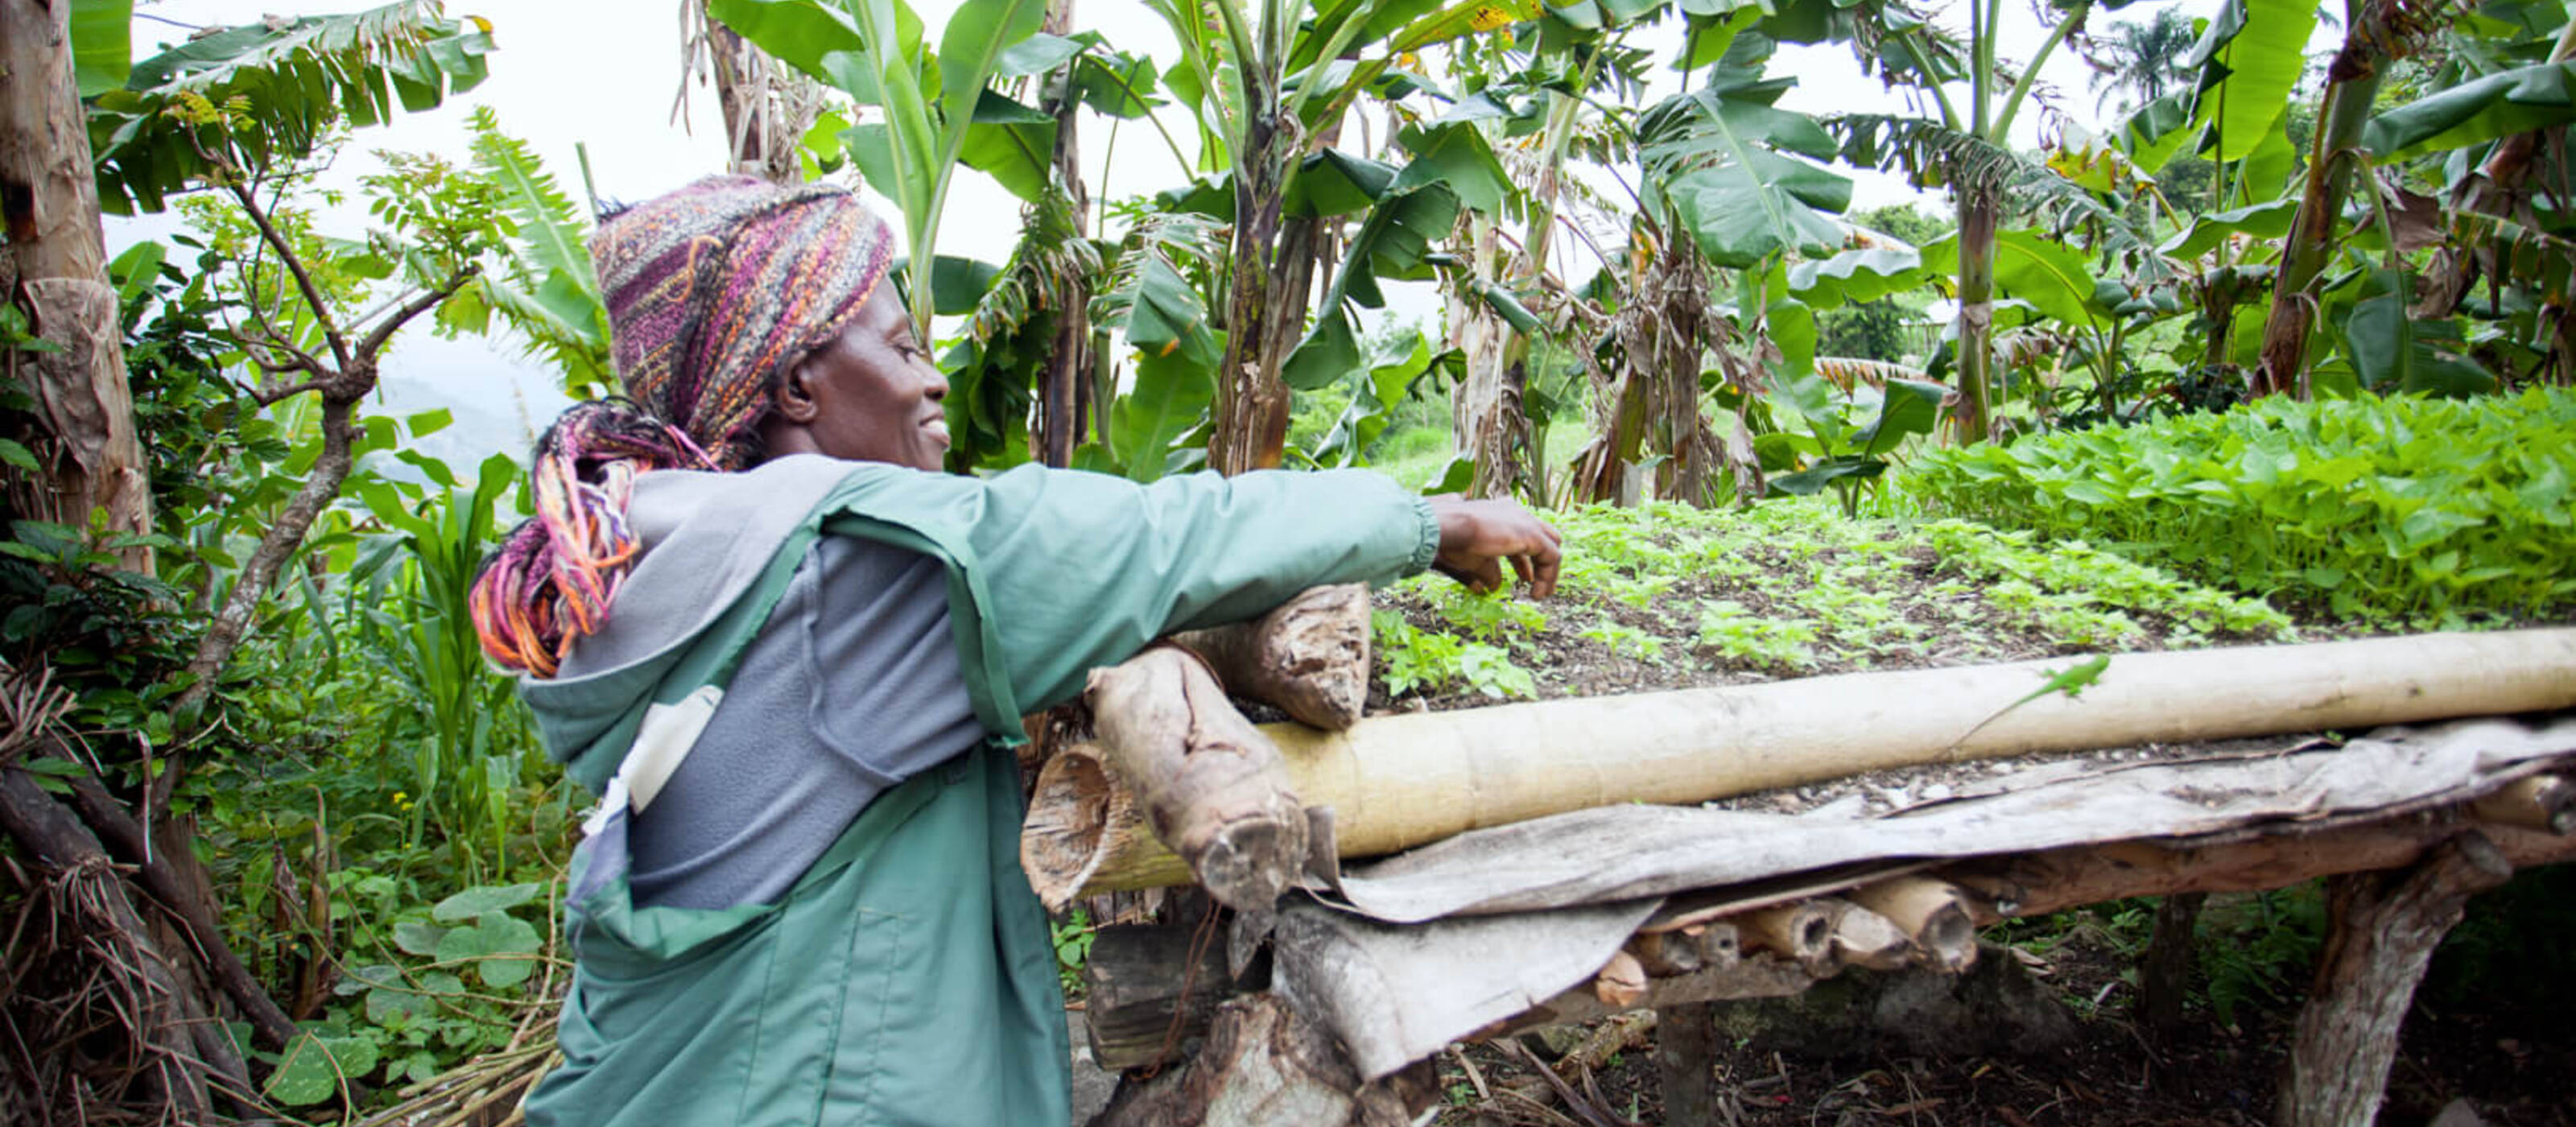 A woman in Haiti tends her garden in order to ensure the sustainable feeding of her family